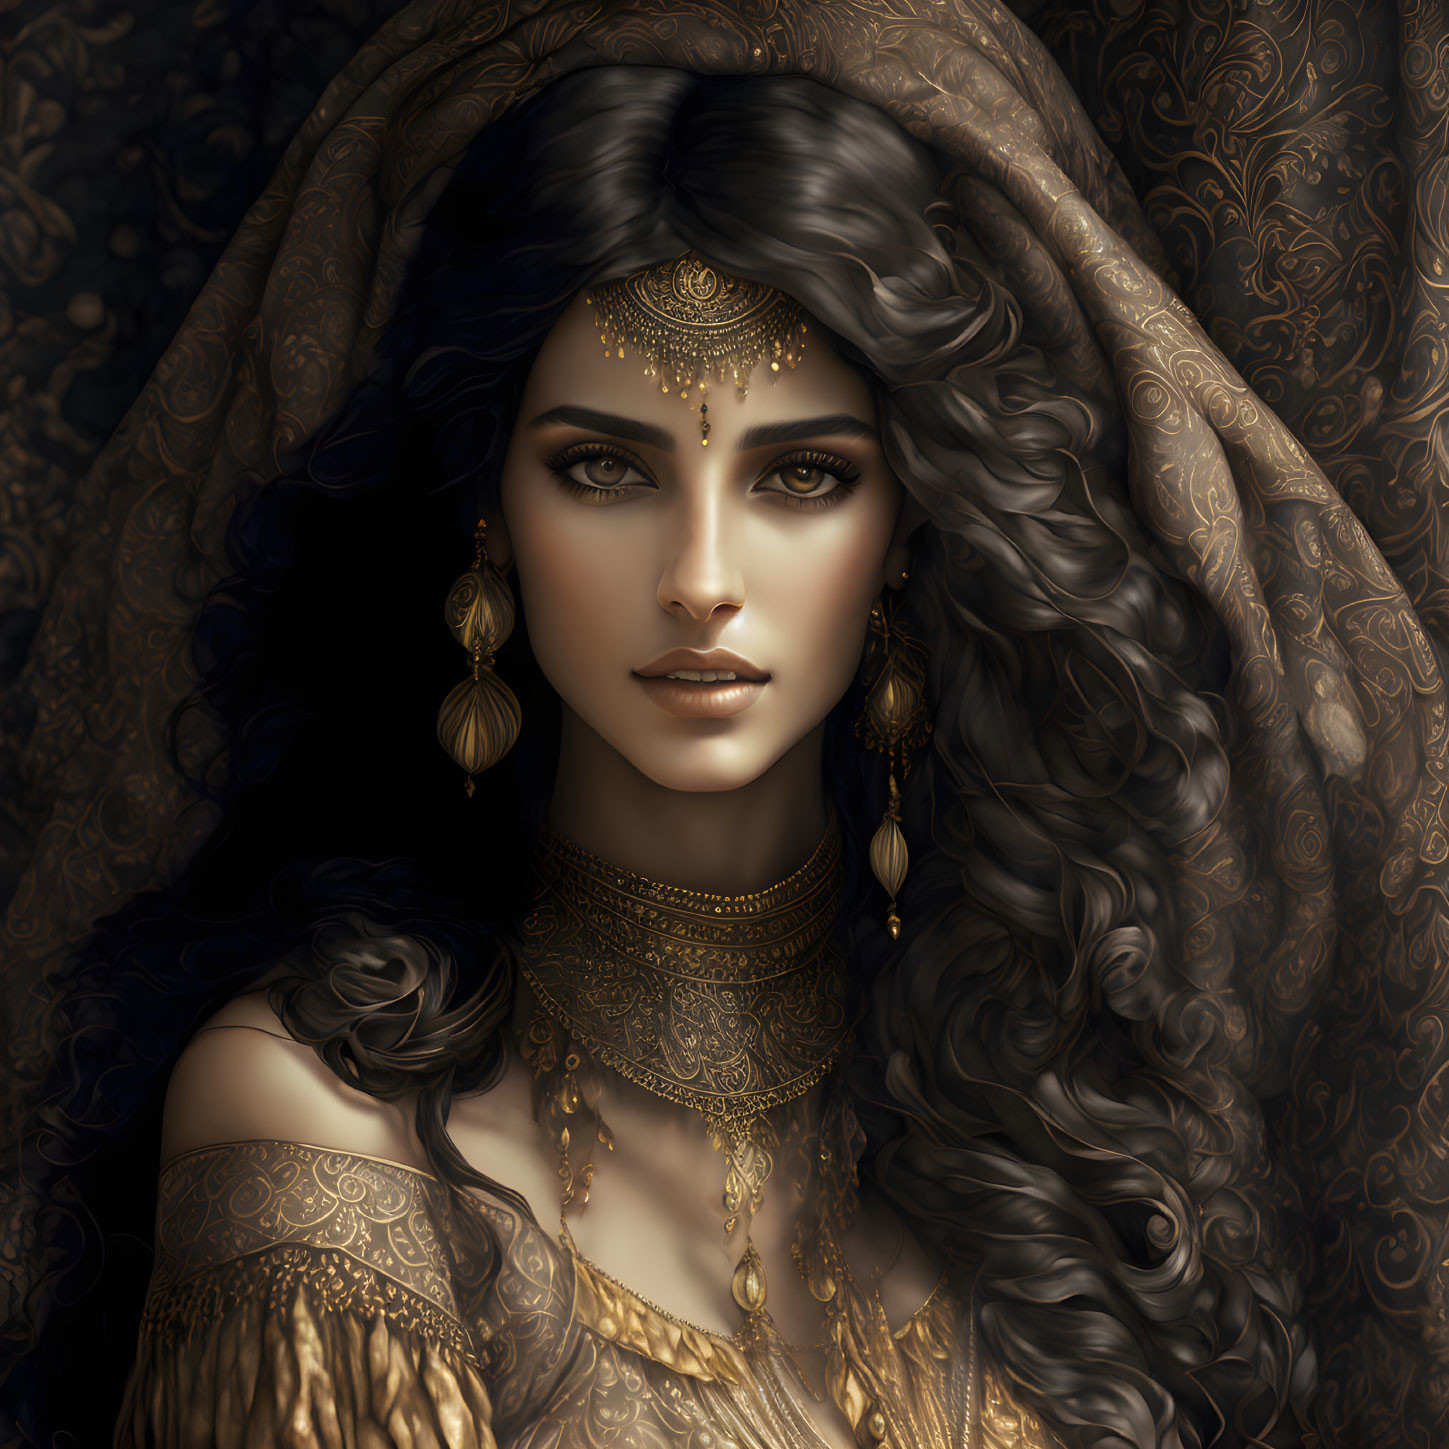 Detailed illustration of woman in ornate attire with golden jewelry and hooded cloak